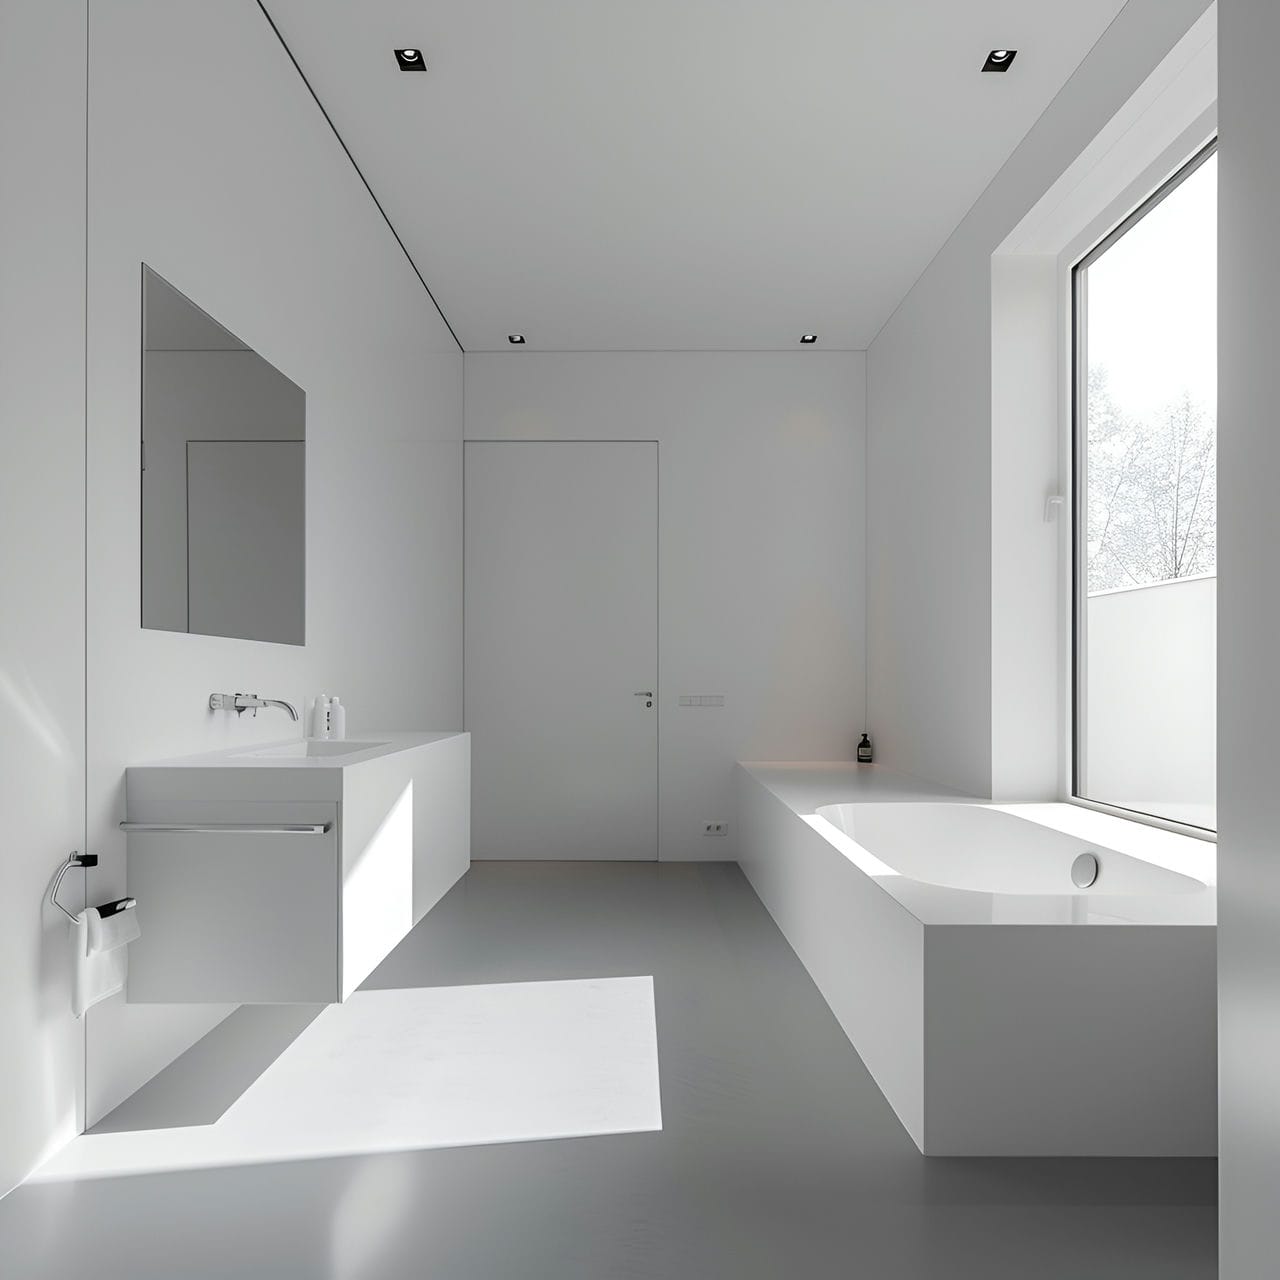 Bathroom: size, functionality, uses, furniture and renovation